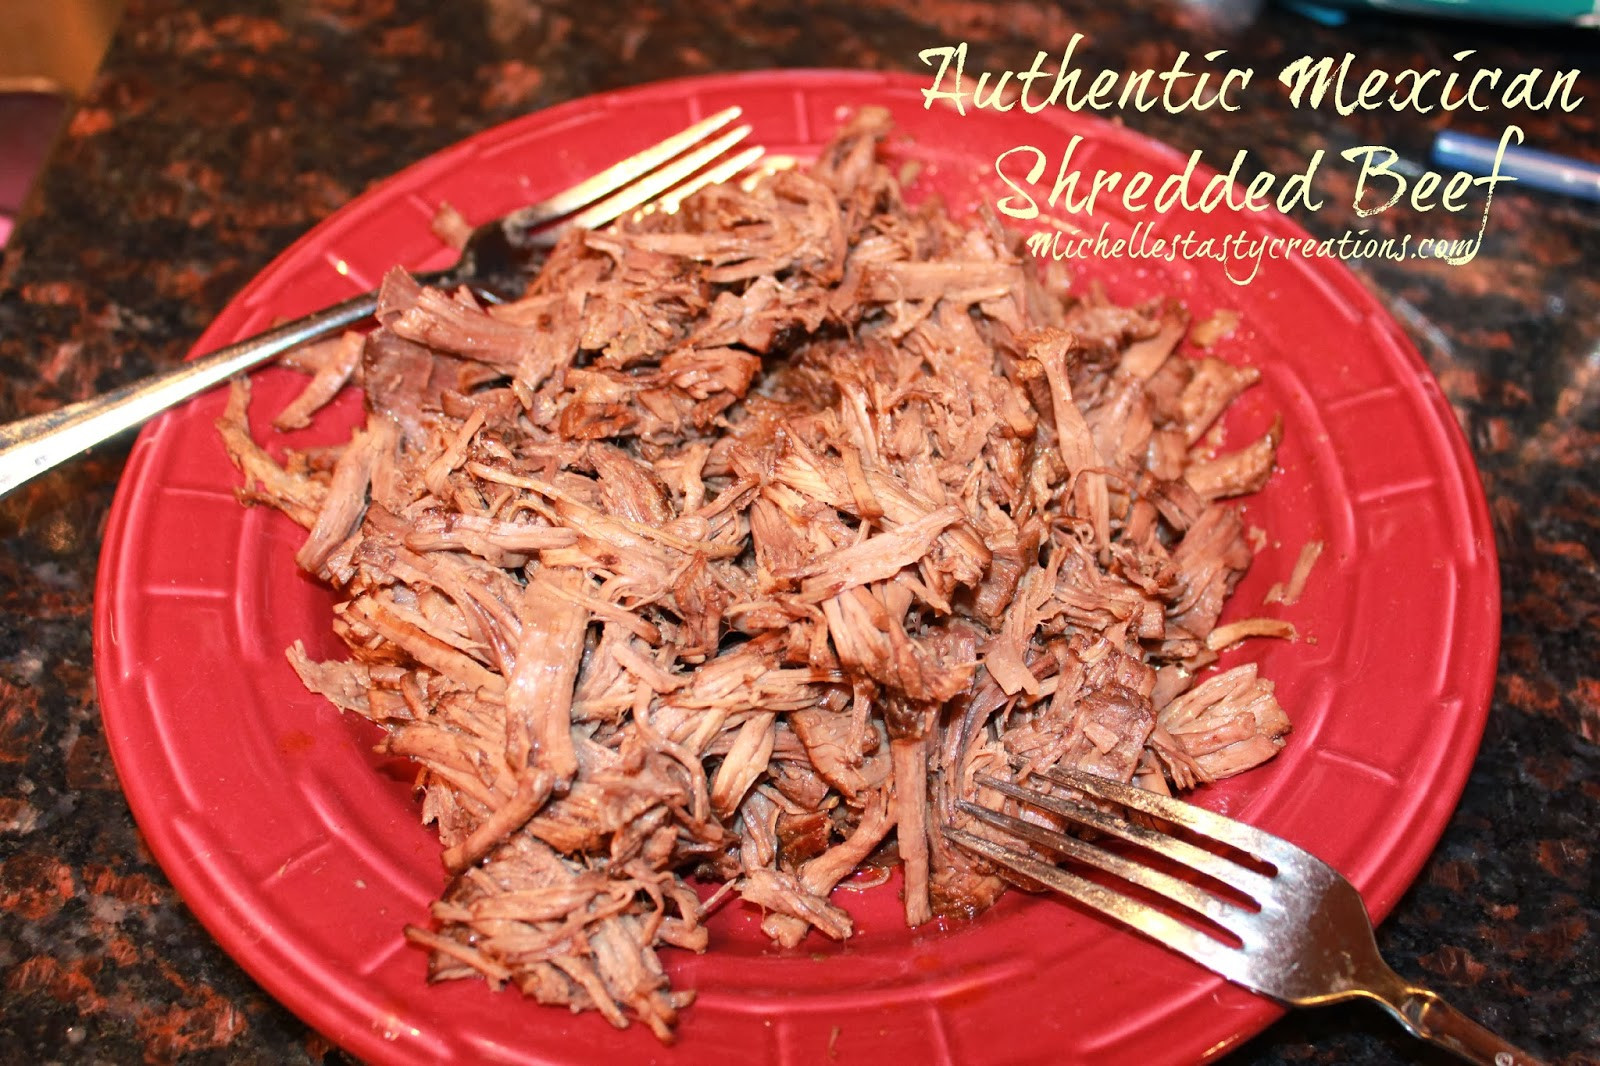 Authentic Mexican Beef Recipes Unique Michelle S Tasty Creations Authentic Mexican Shredded Beef